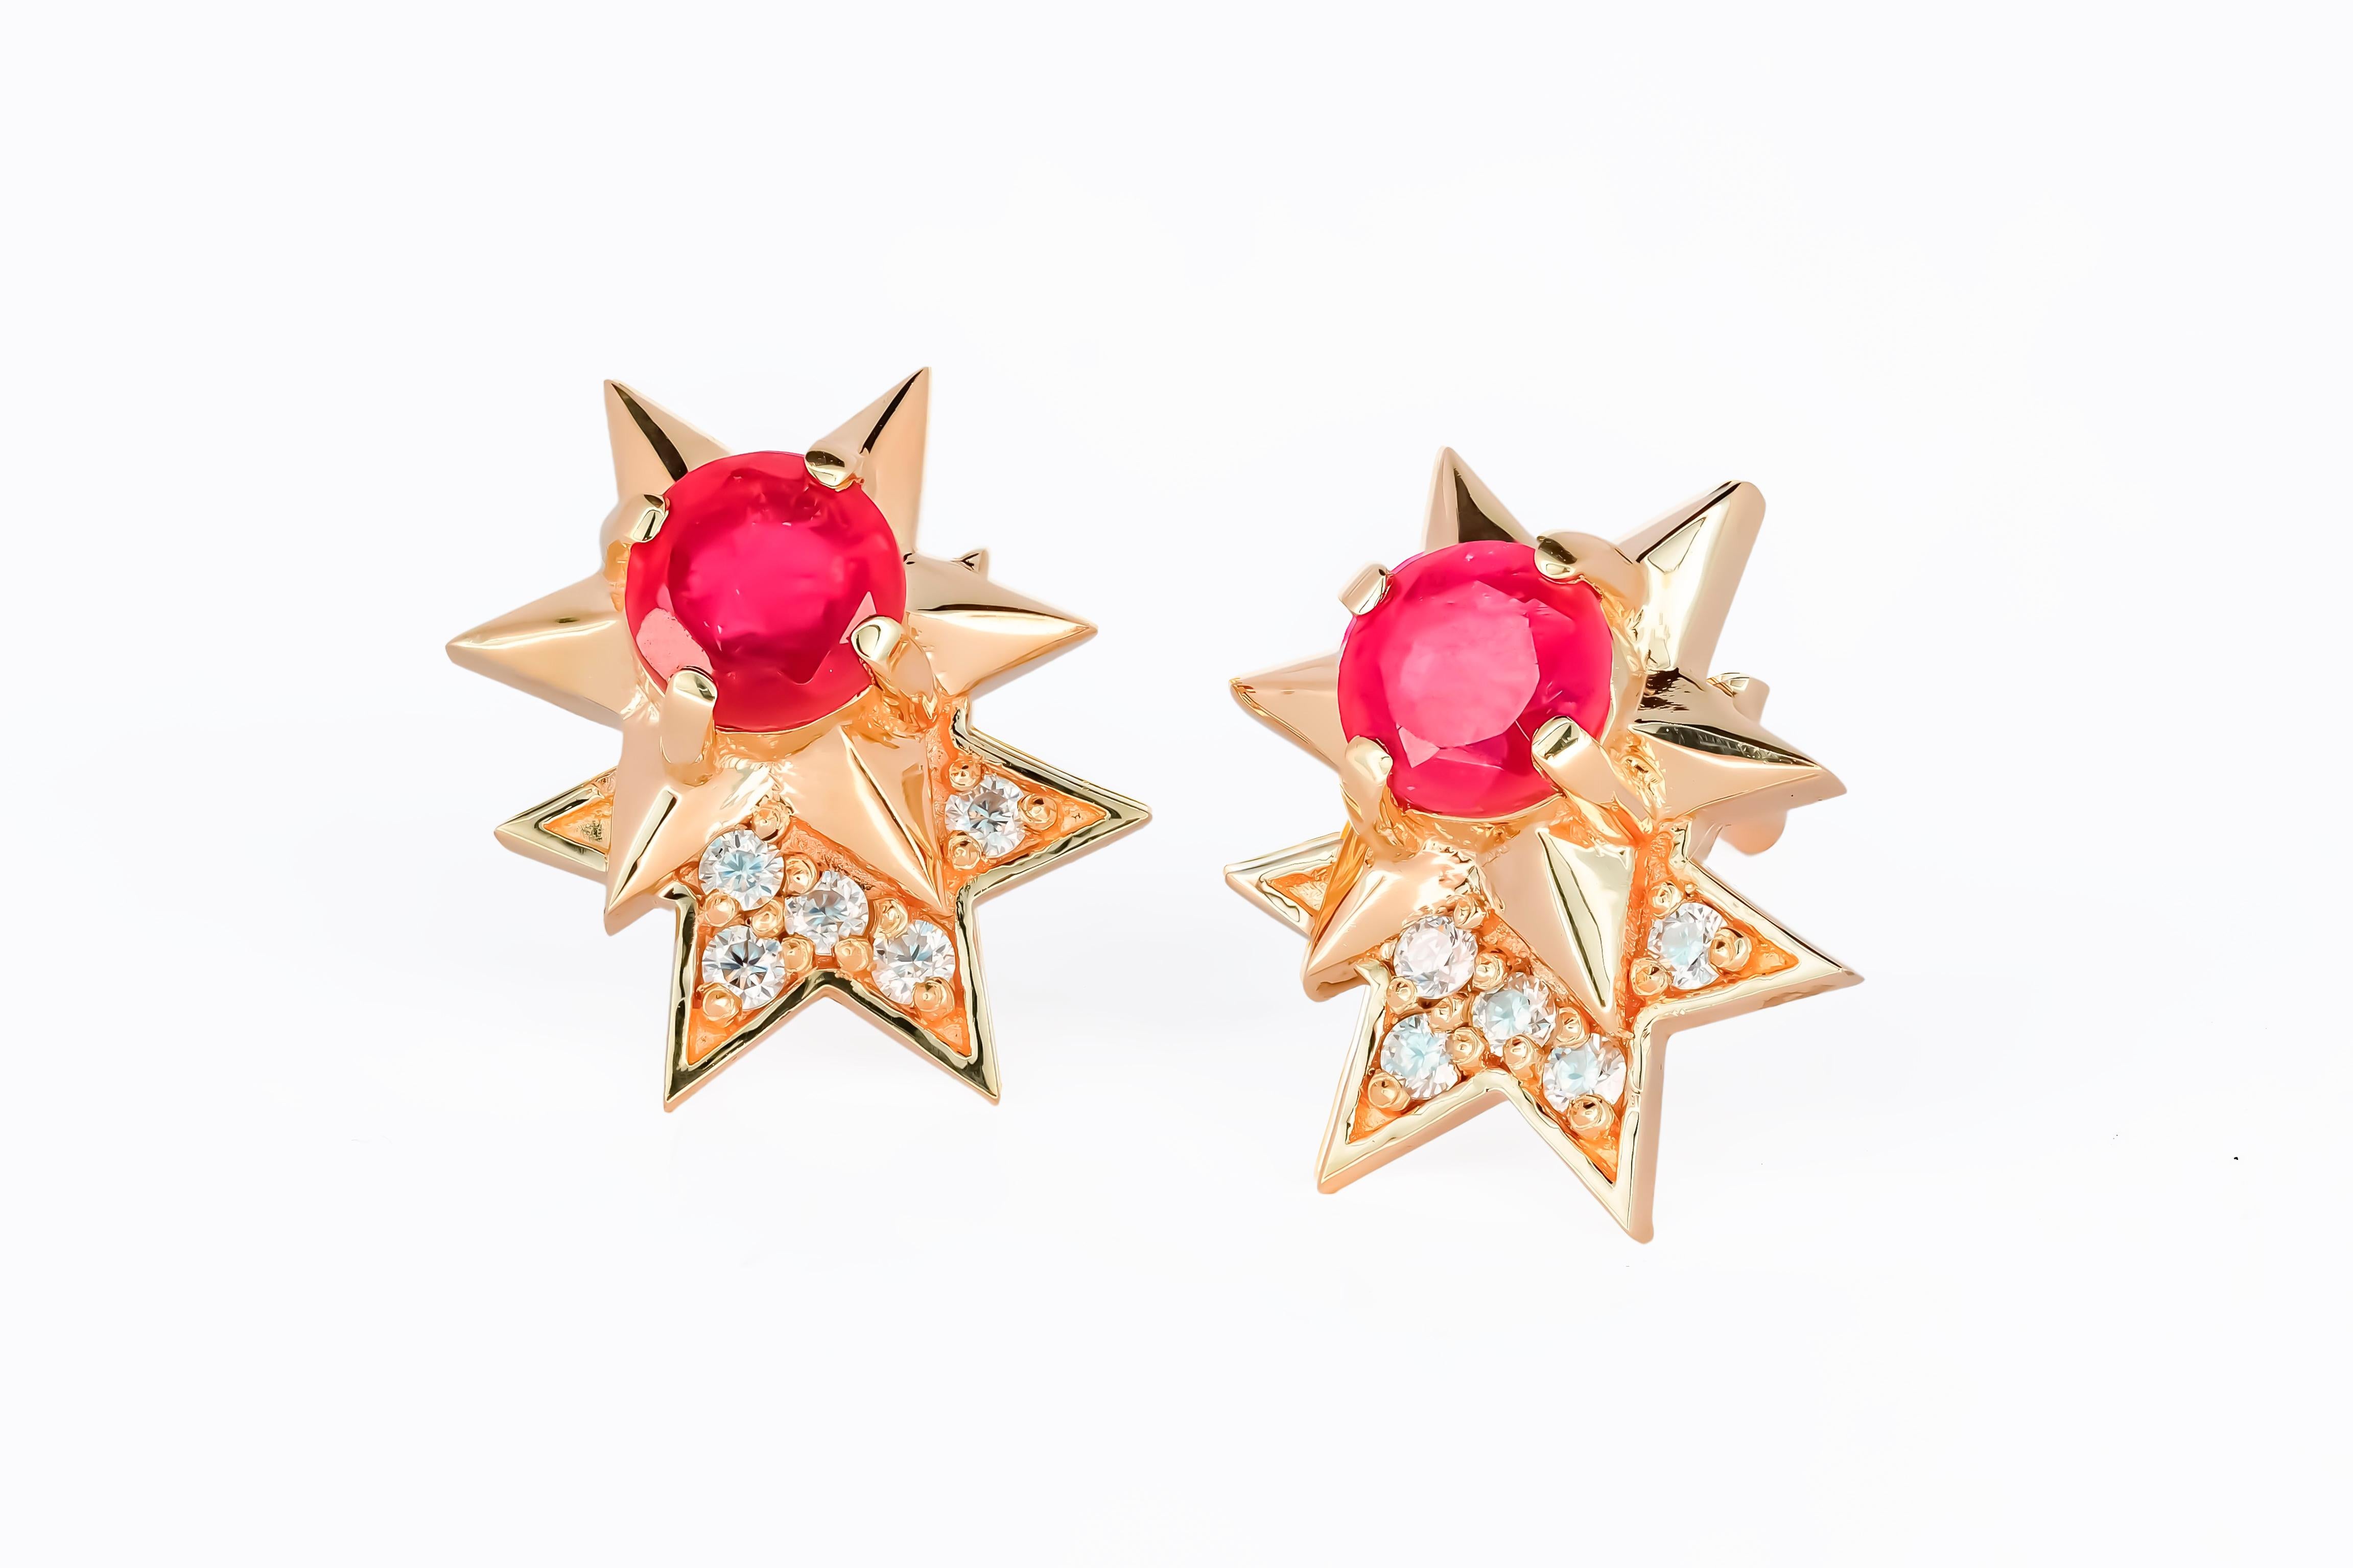 Round Cut 14 Karat Gold Earrings Studs with Rubies and Diamonds. Ruby stud earrings For Sale